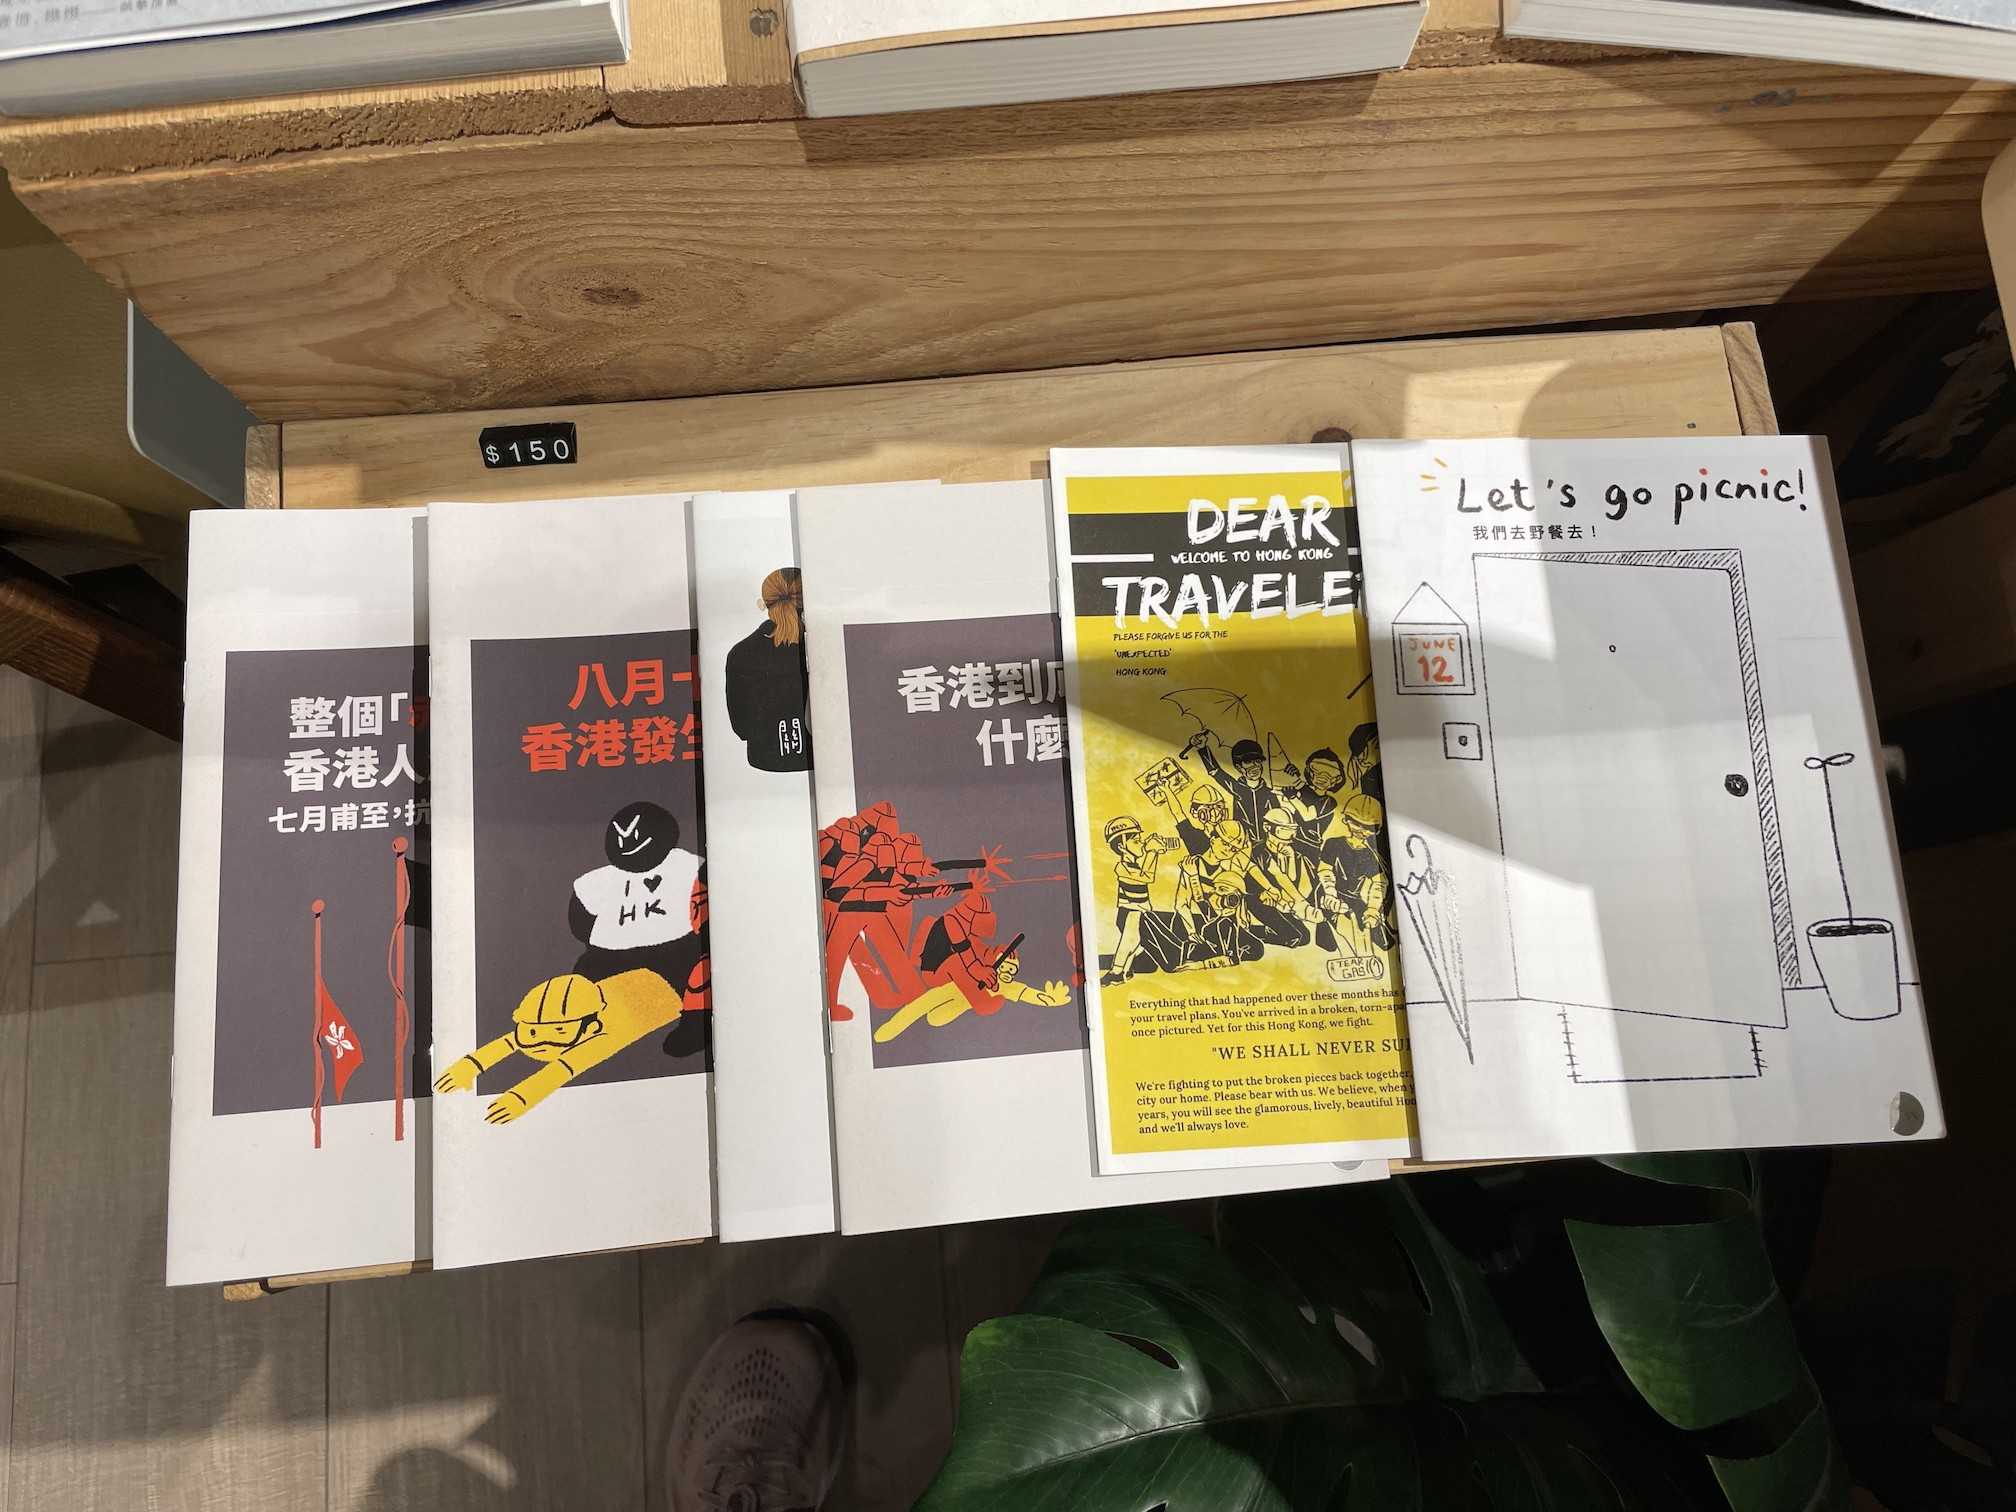 An assortment of six handmade magazines or zines with various titles like Let’s go picnic! and Dear Traveler: Welcome to Hong Kong are laid out on a wooden table. 